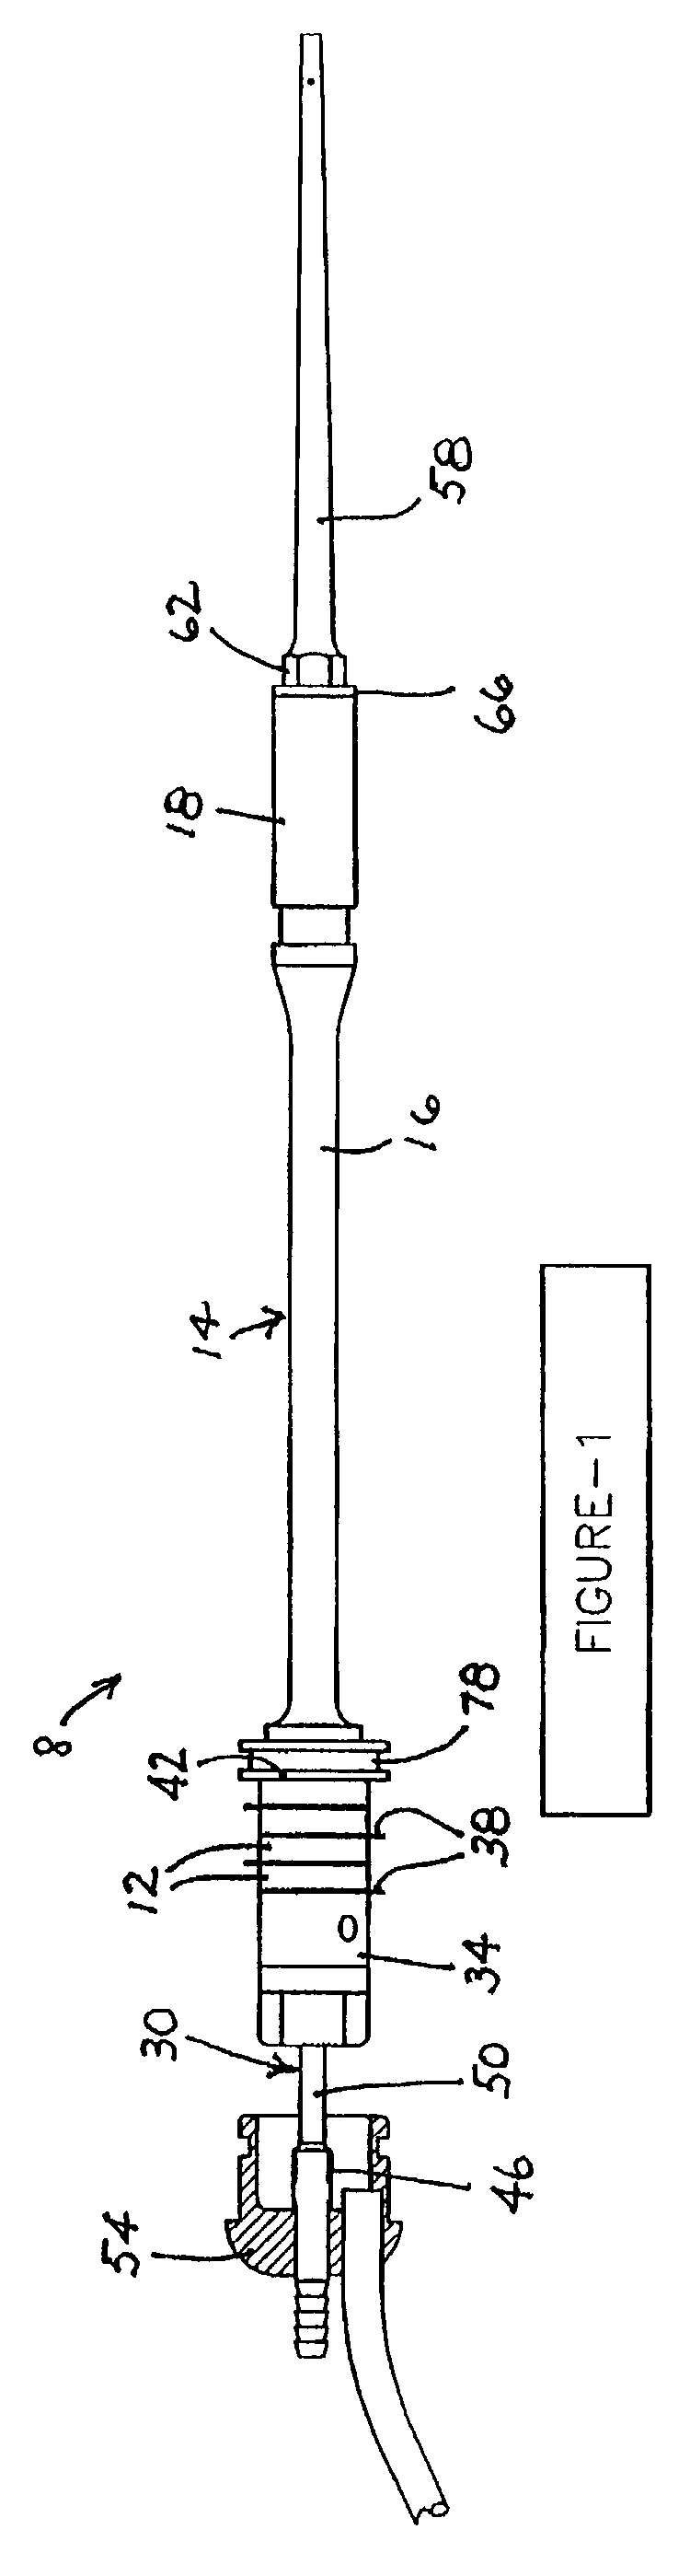 High efficiency medical transducer with ergonomic shape and method of manufacture